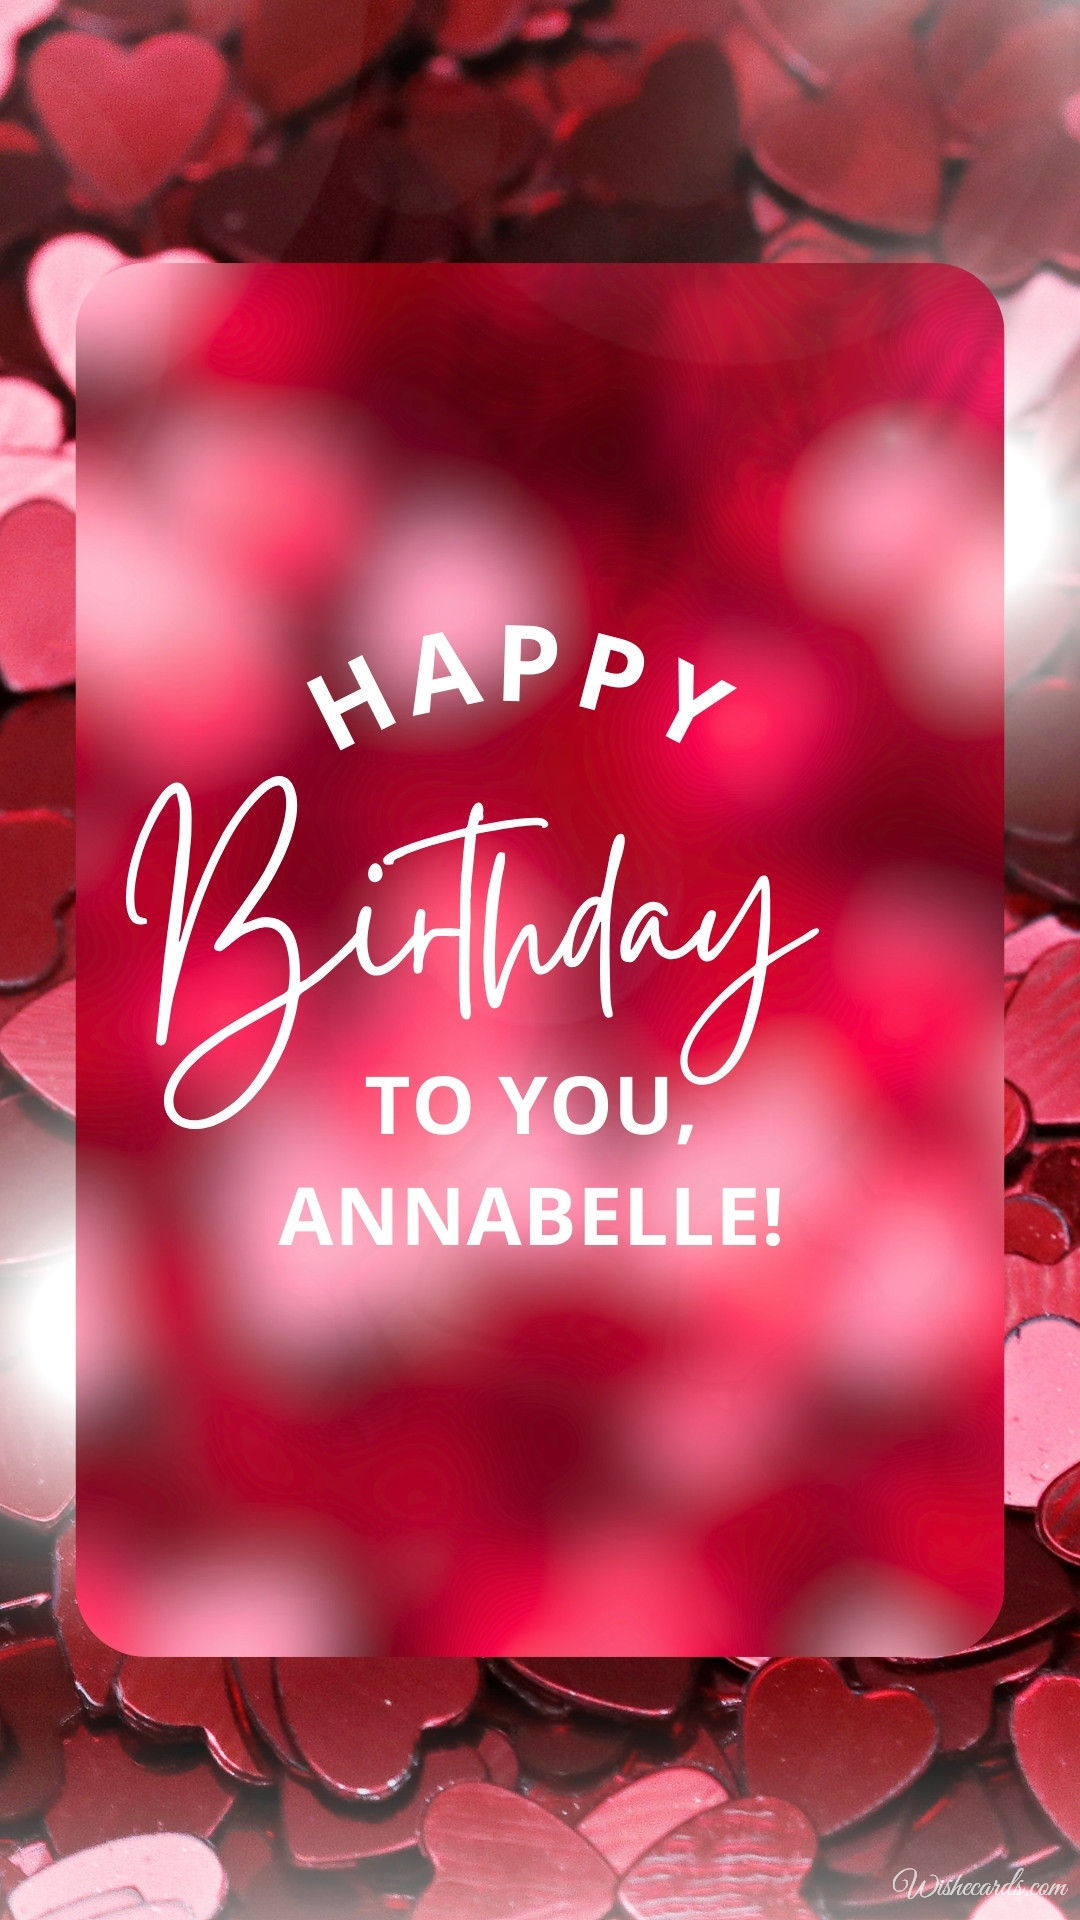 Birthday Image for Annabelle